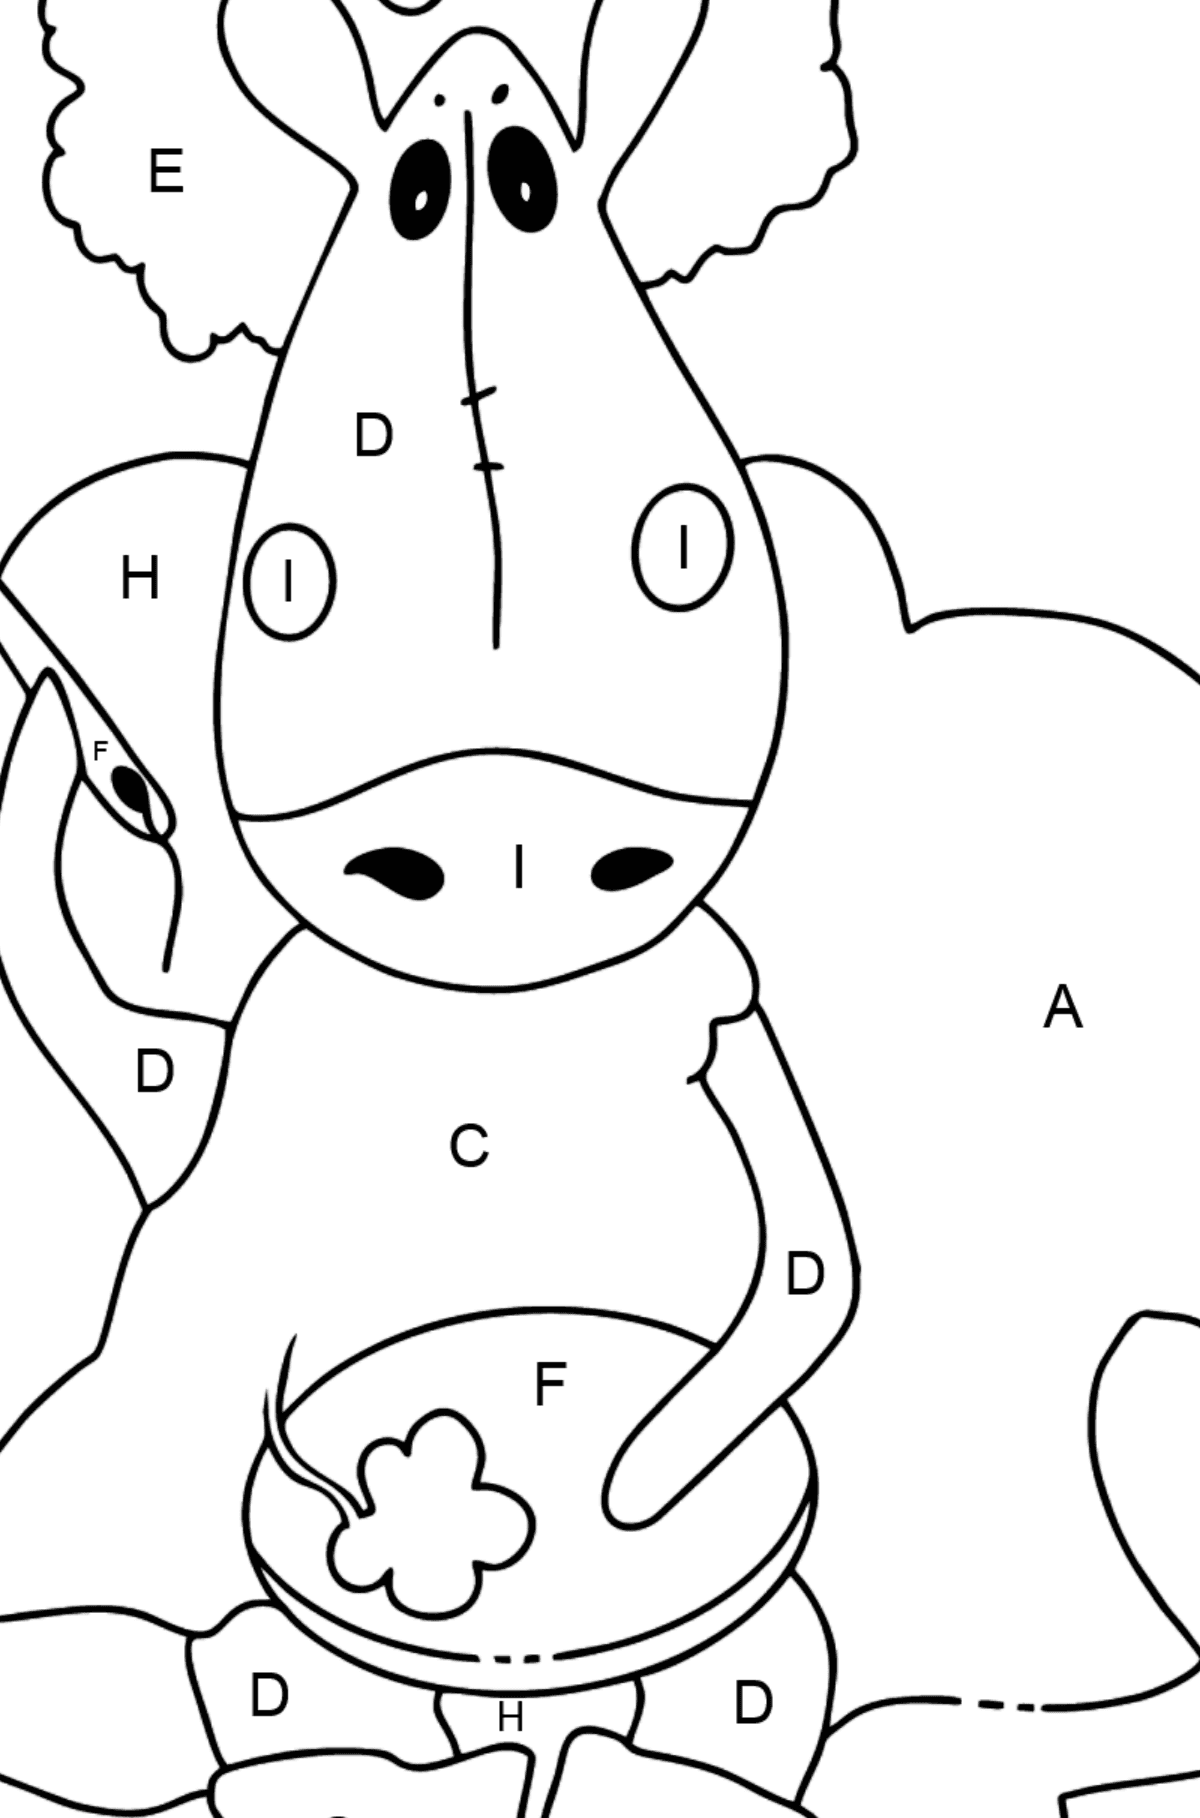 Coloring page fairytale horse (easy) - Coloring by Letters for Kids